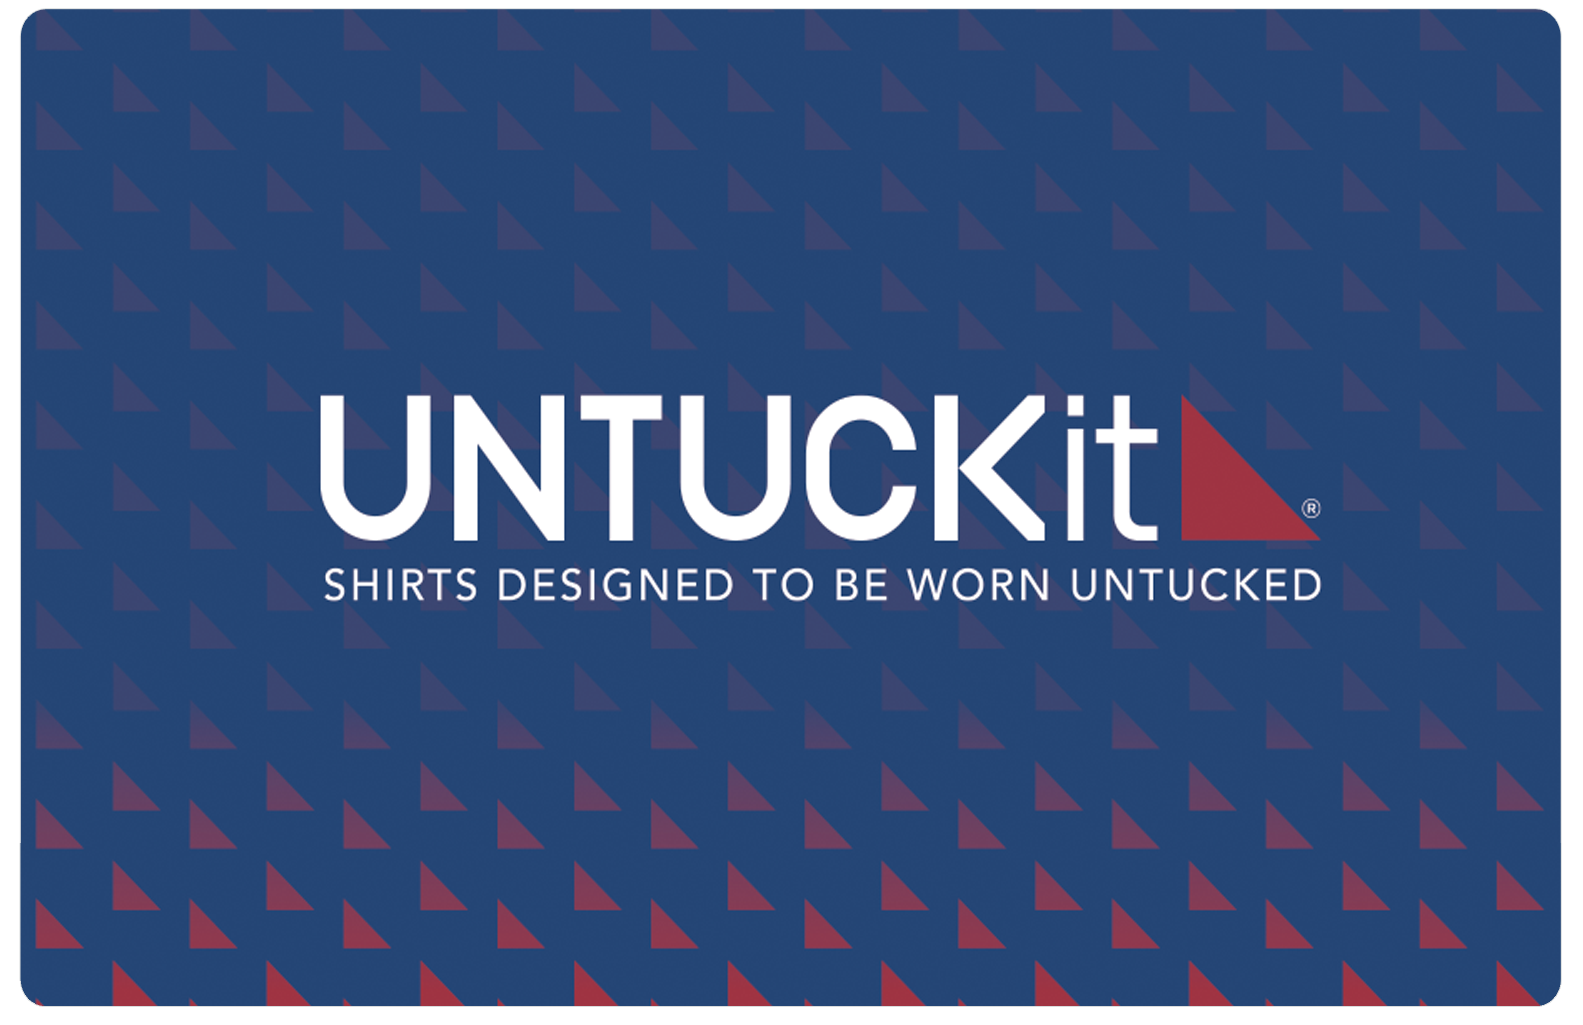 Buy Untuckit Gift Cards Discounts up to 6% CardCash